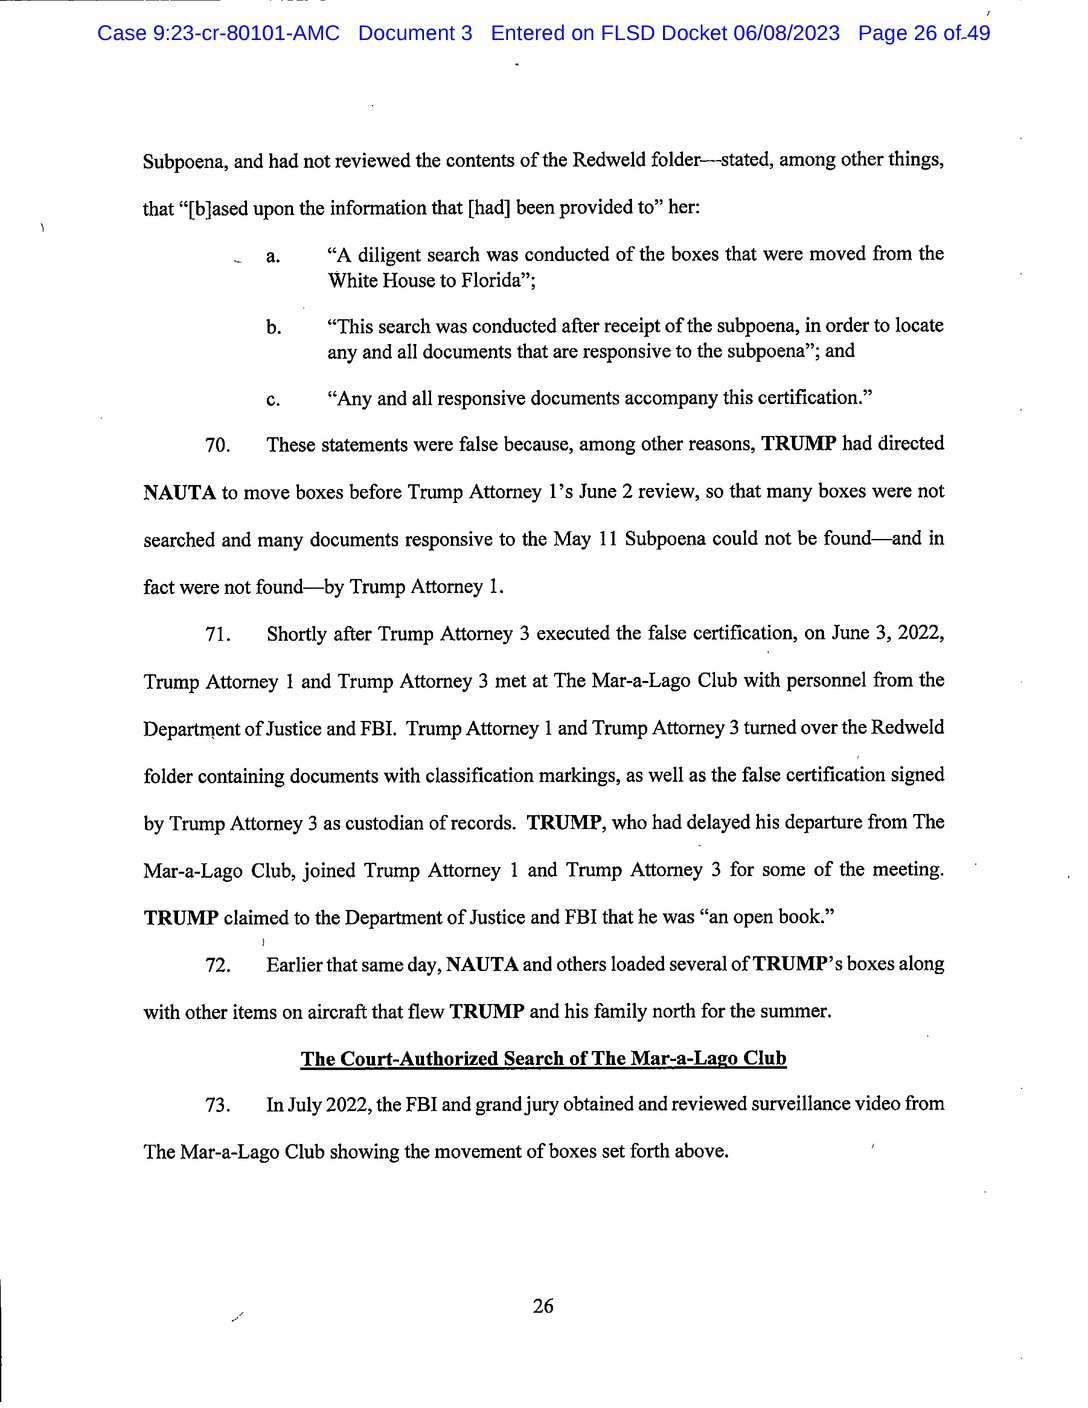 Page 26 of Donald Trump Classified Documents Indictment PDF document.